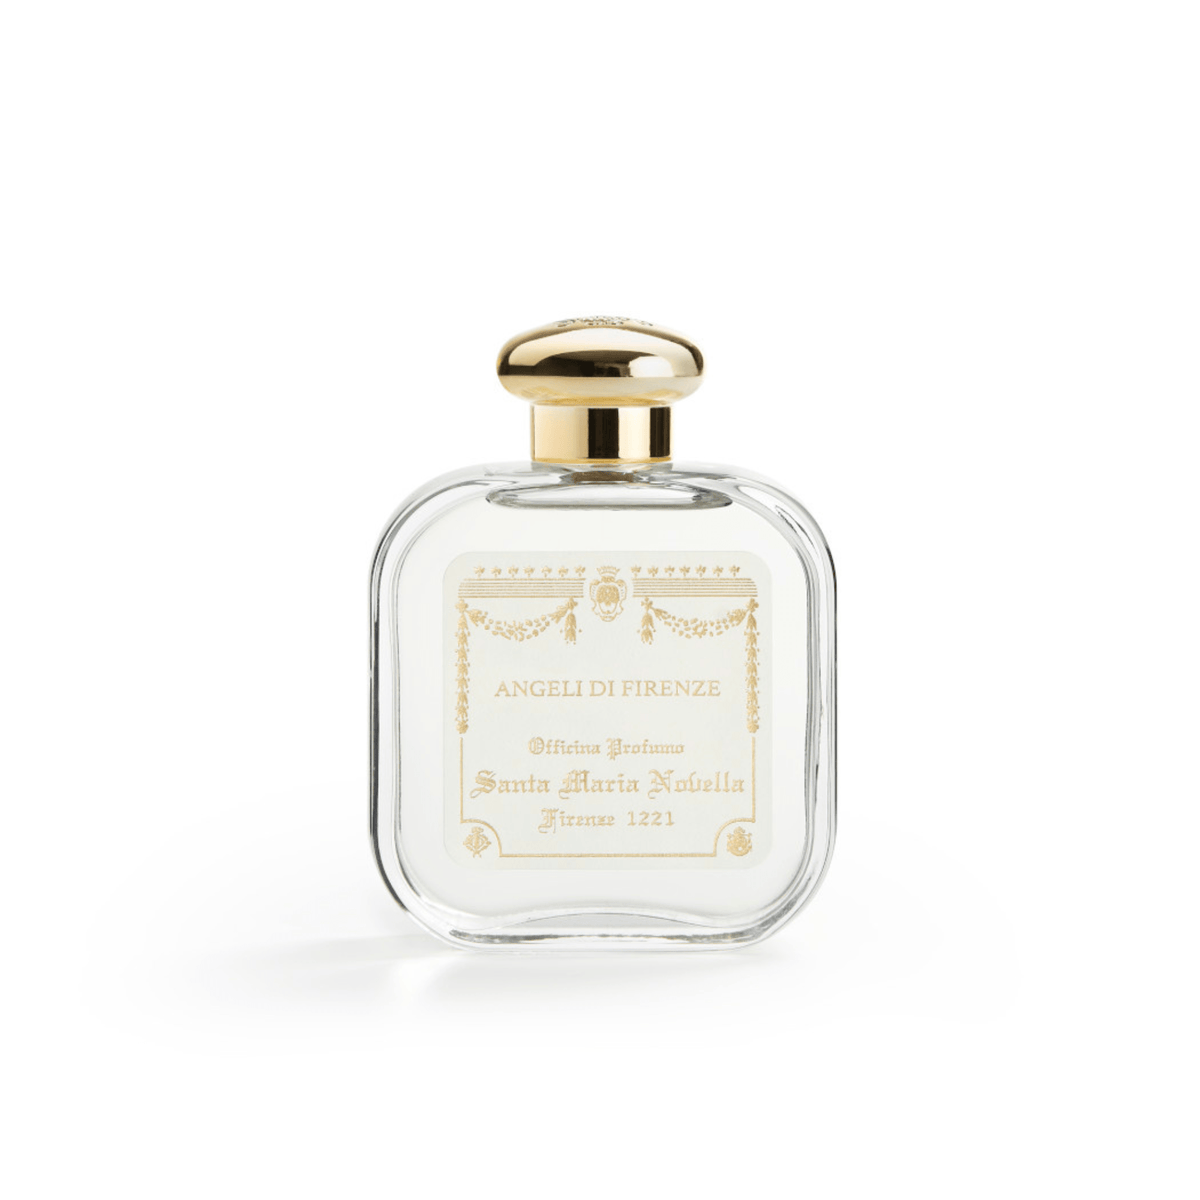 Primary Image of Angels of Florence (Angeli Di Firenze) Eau de Cologne